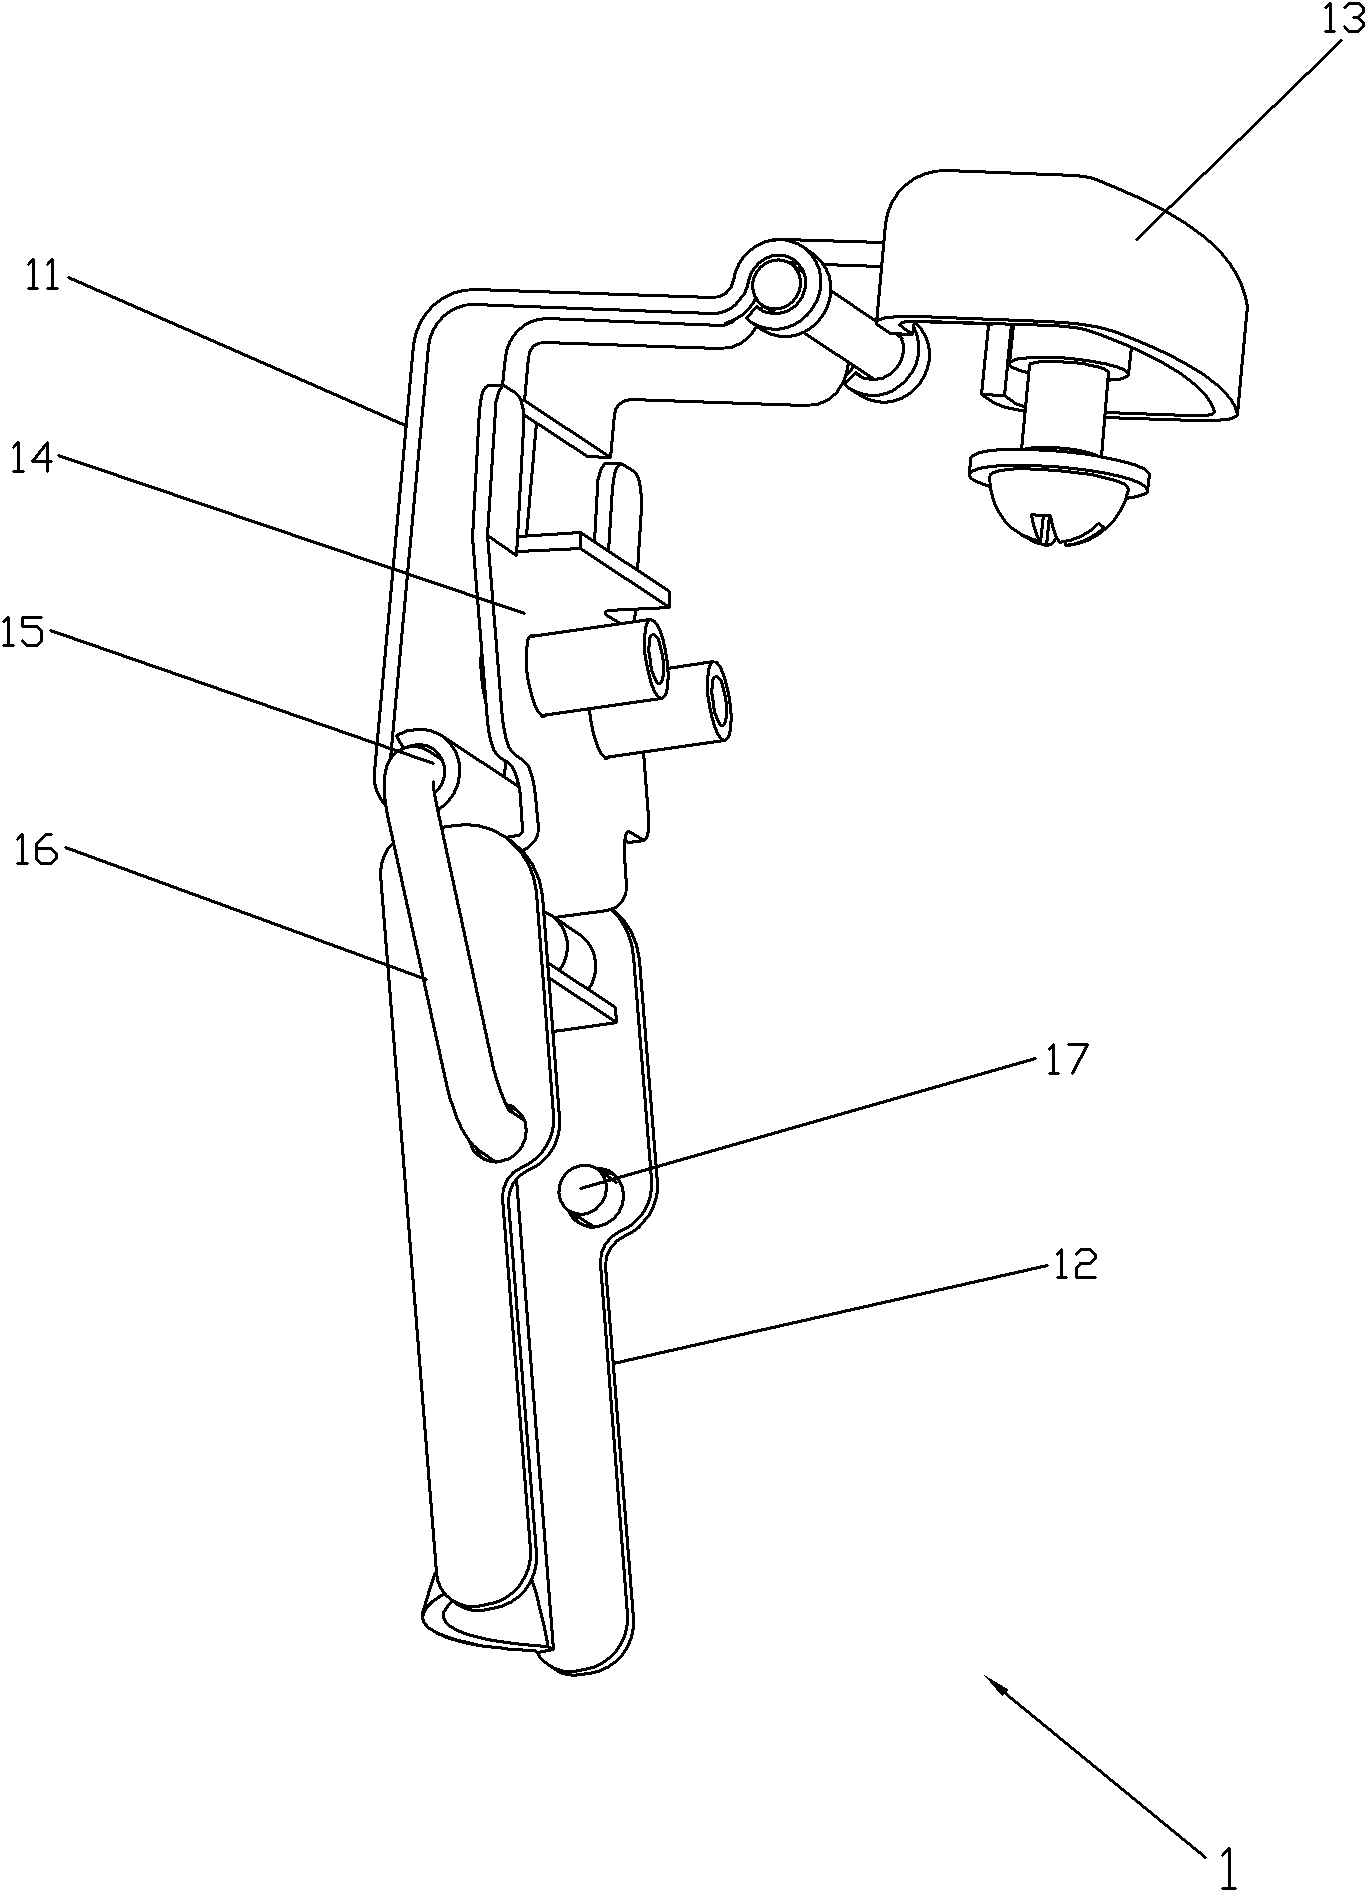 Hasp-type hinge structure and lamp